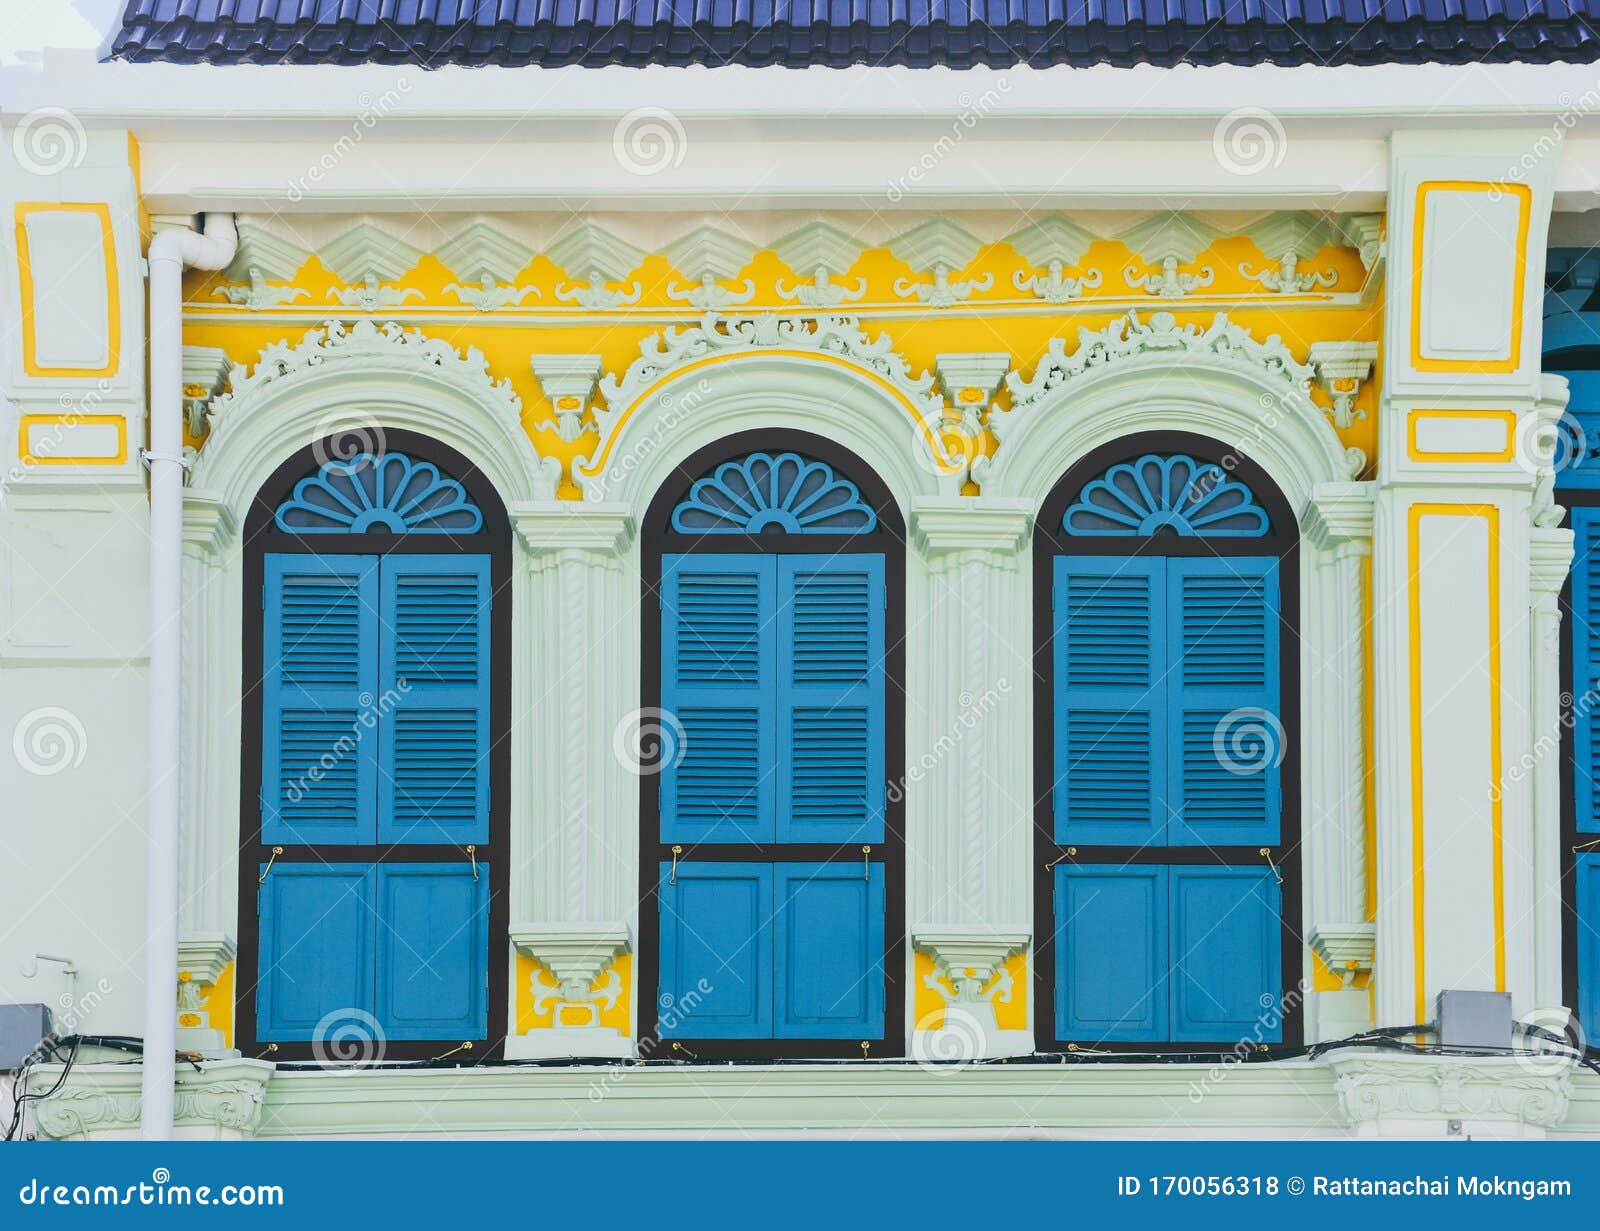 blue color wooden arched window on green and yellow cement wall in chino portuguese style at phuket old town, thailand